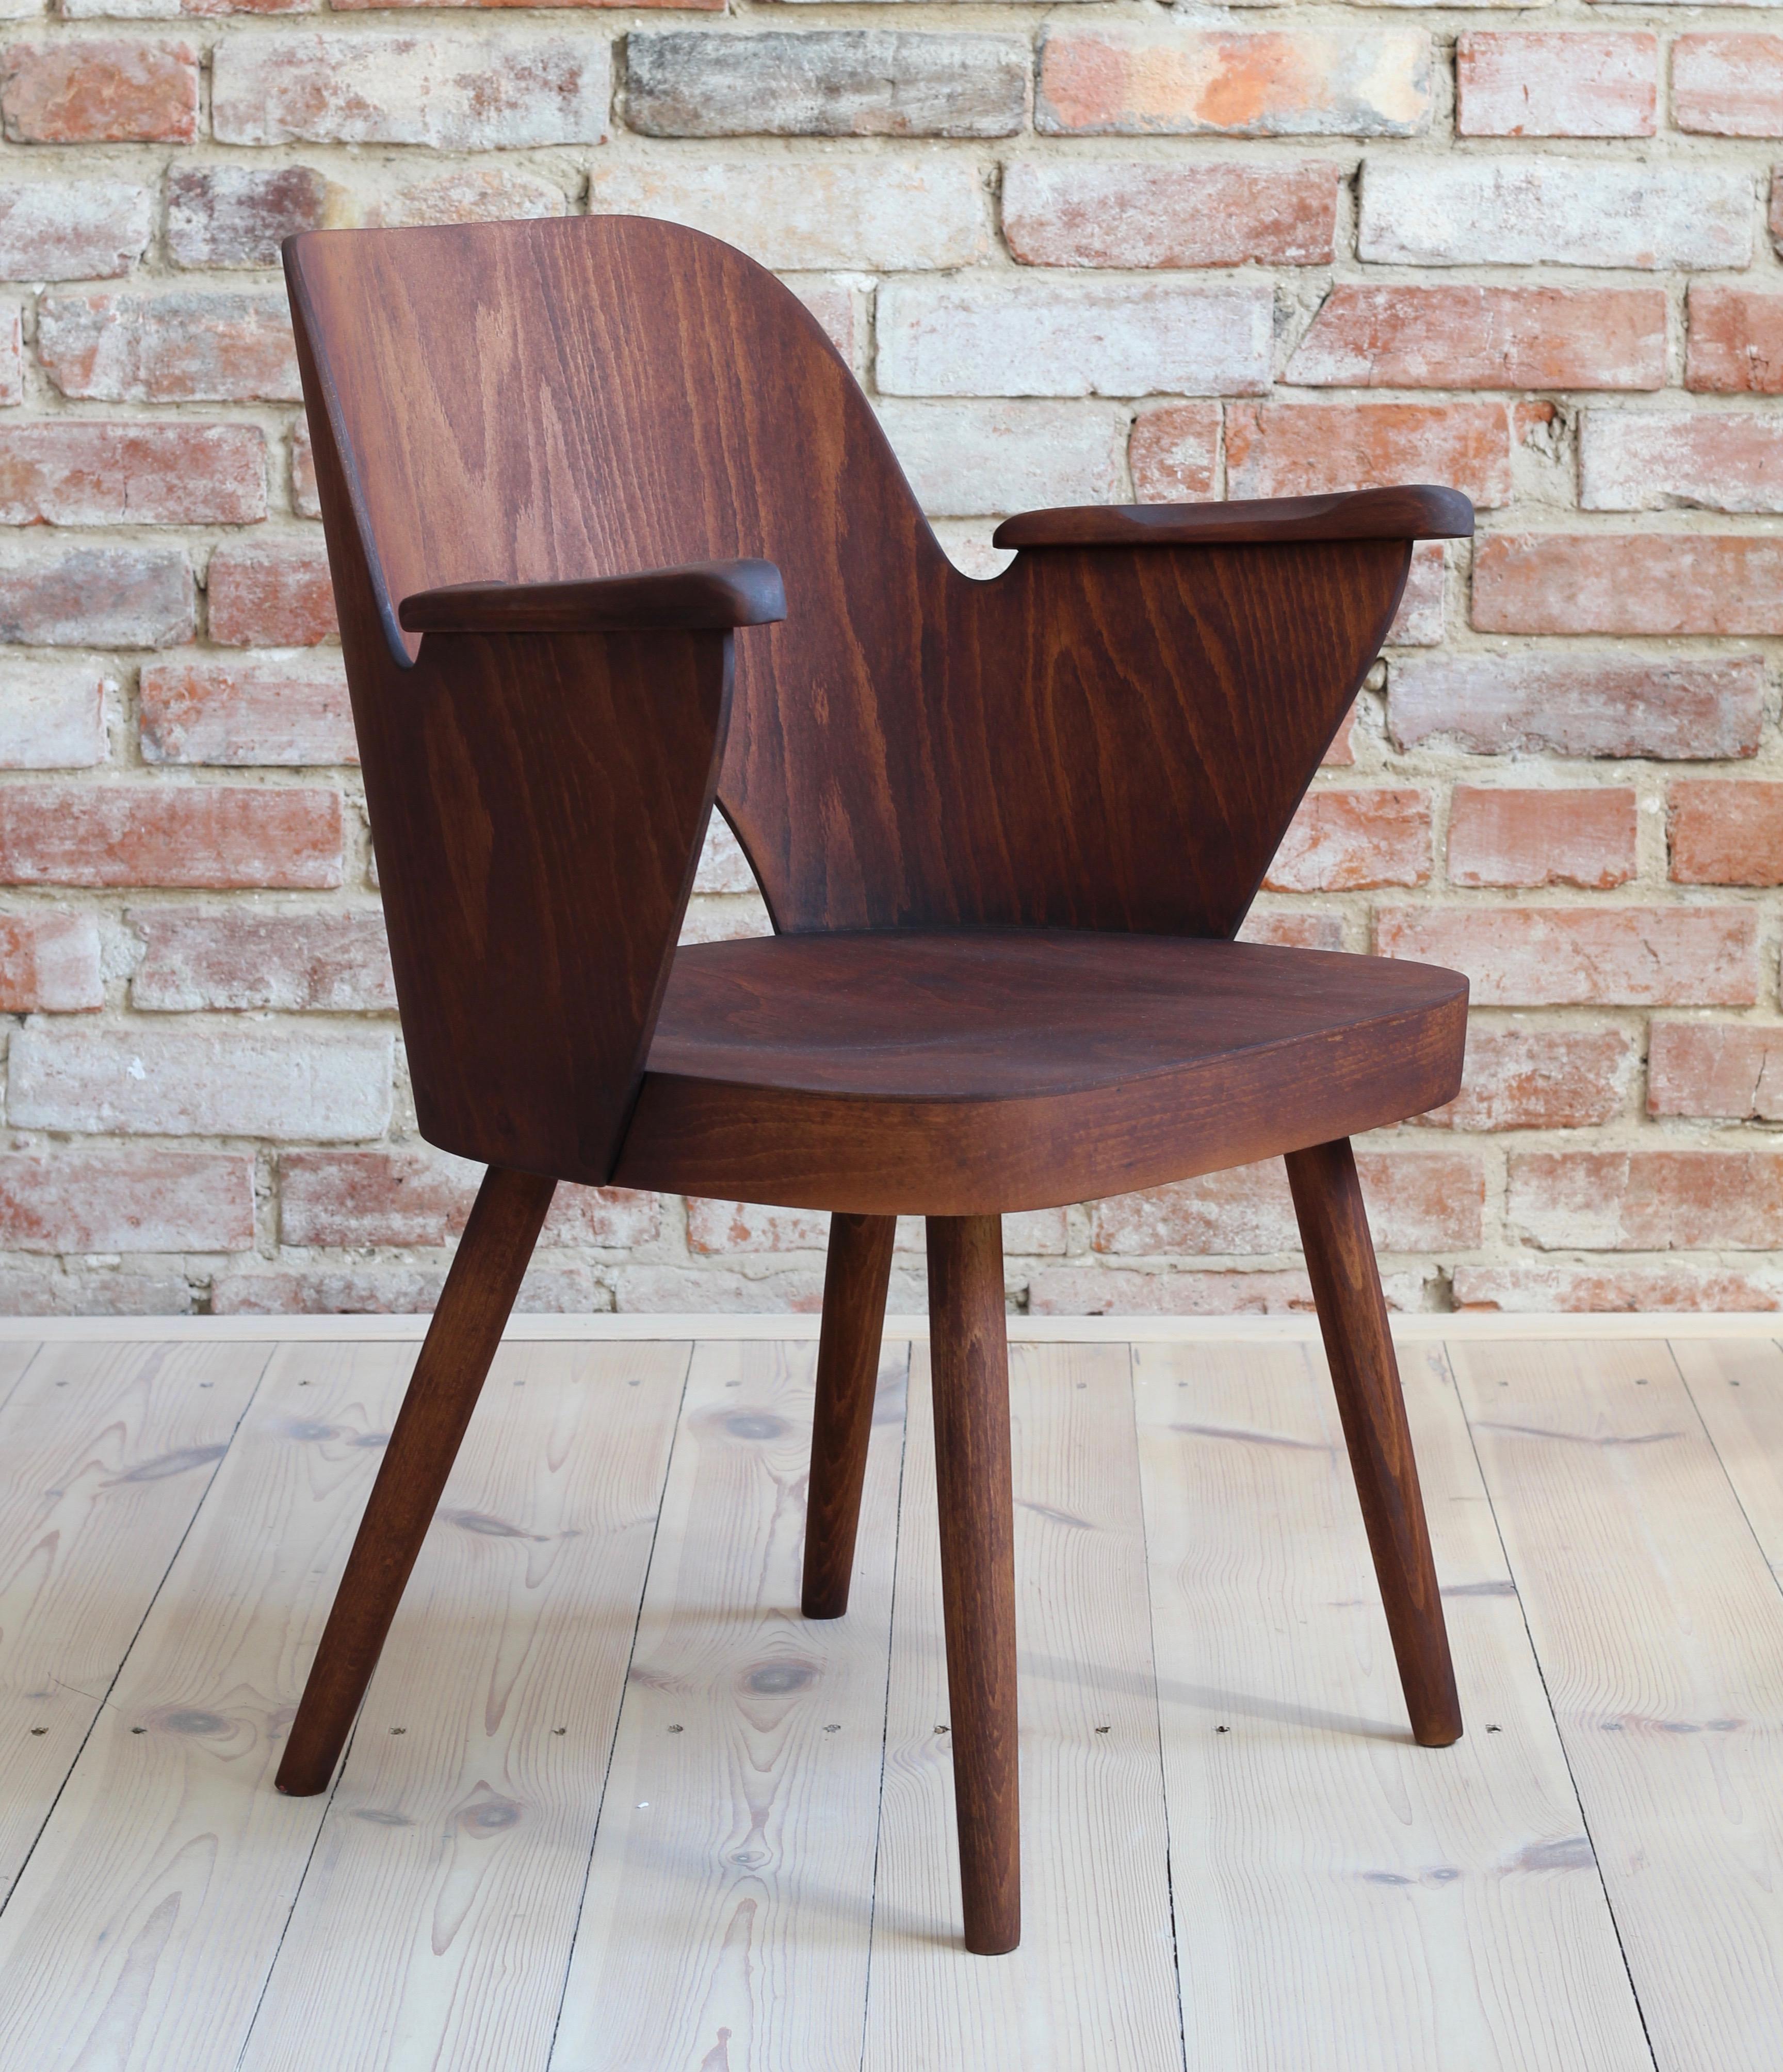 These chairs were designed by Lubomír Hofmann and produced in 1960s by a Czechoslovakian company TON. The chairs are made of beech wood in a unique TON technique of bent plywood. TON (previously Thonet) was a pioneer back in those days in bent